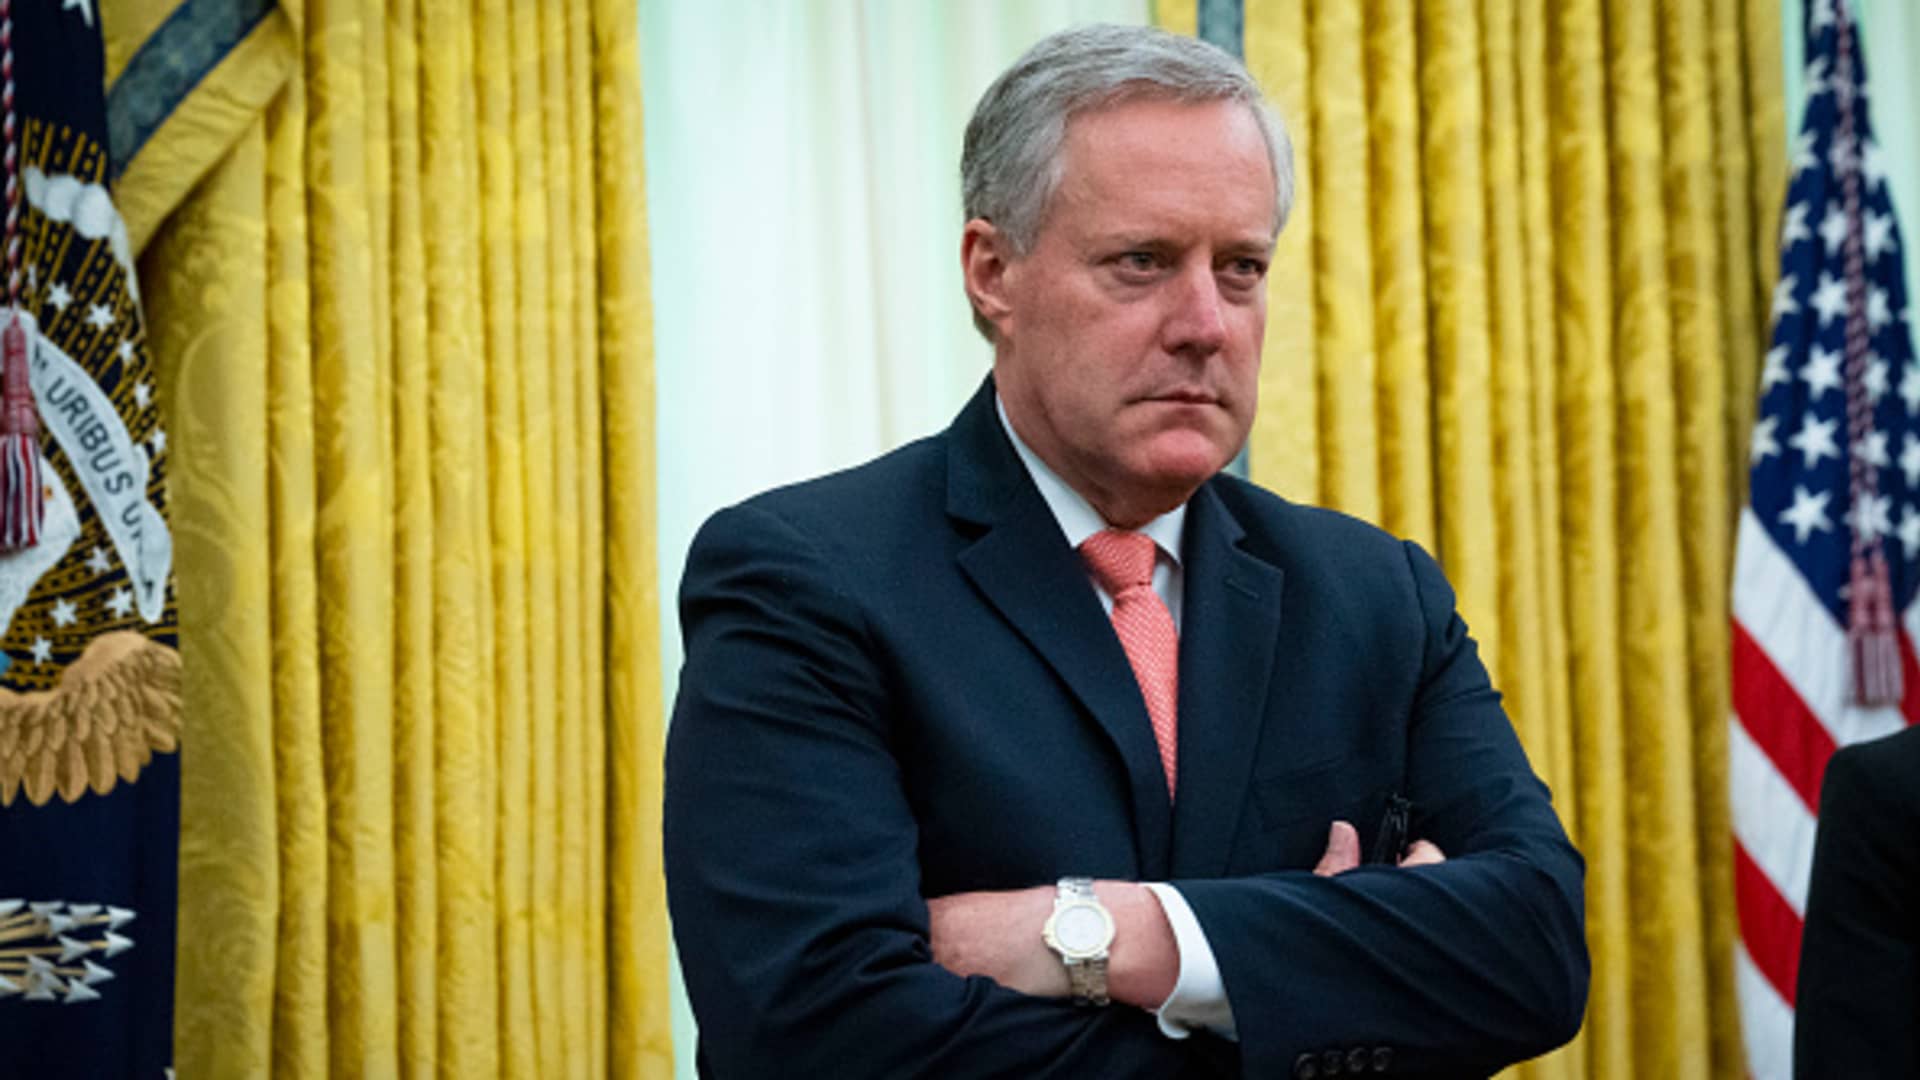 South Carolina Supreme Court agrees to hear appeal by former Trump White House aide Mark Meadows to block grand jury subpoena